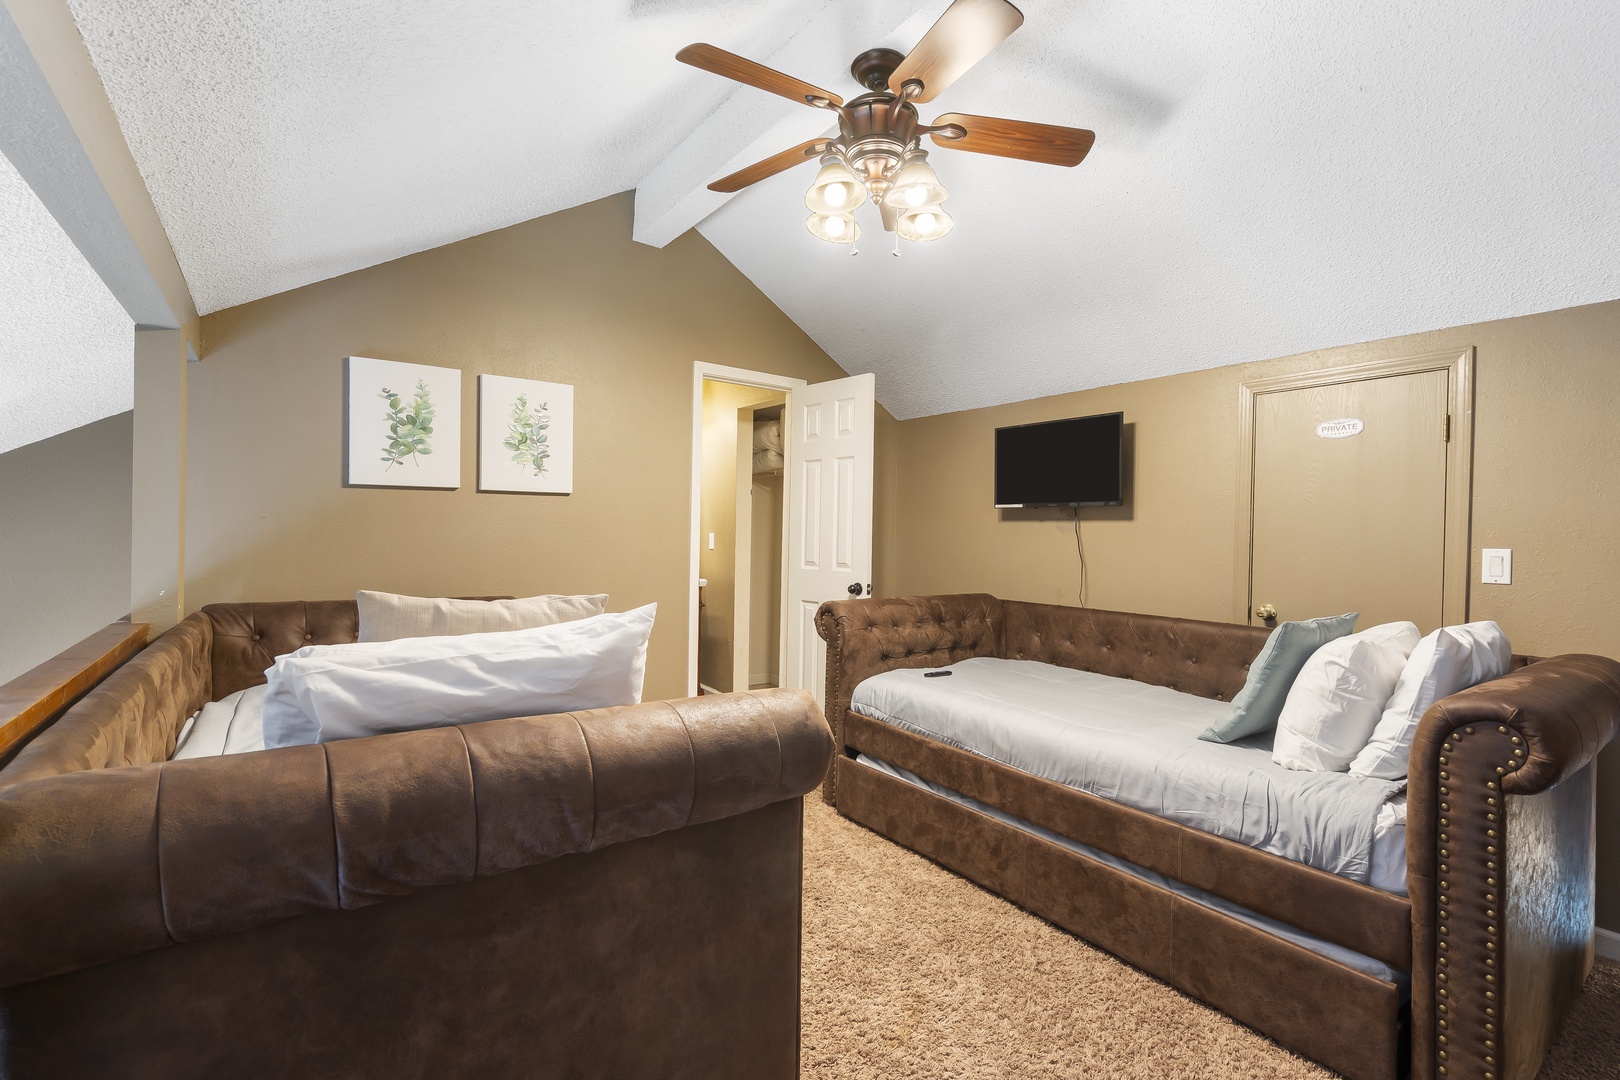 The loft bedroom offers 2 twin beds with trundles, private ensuite, & Smart TV